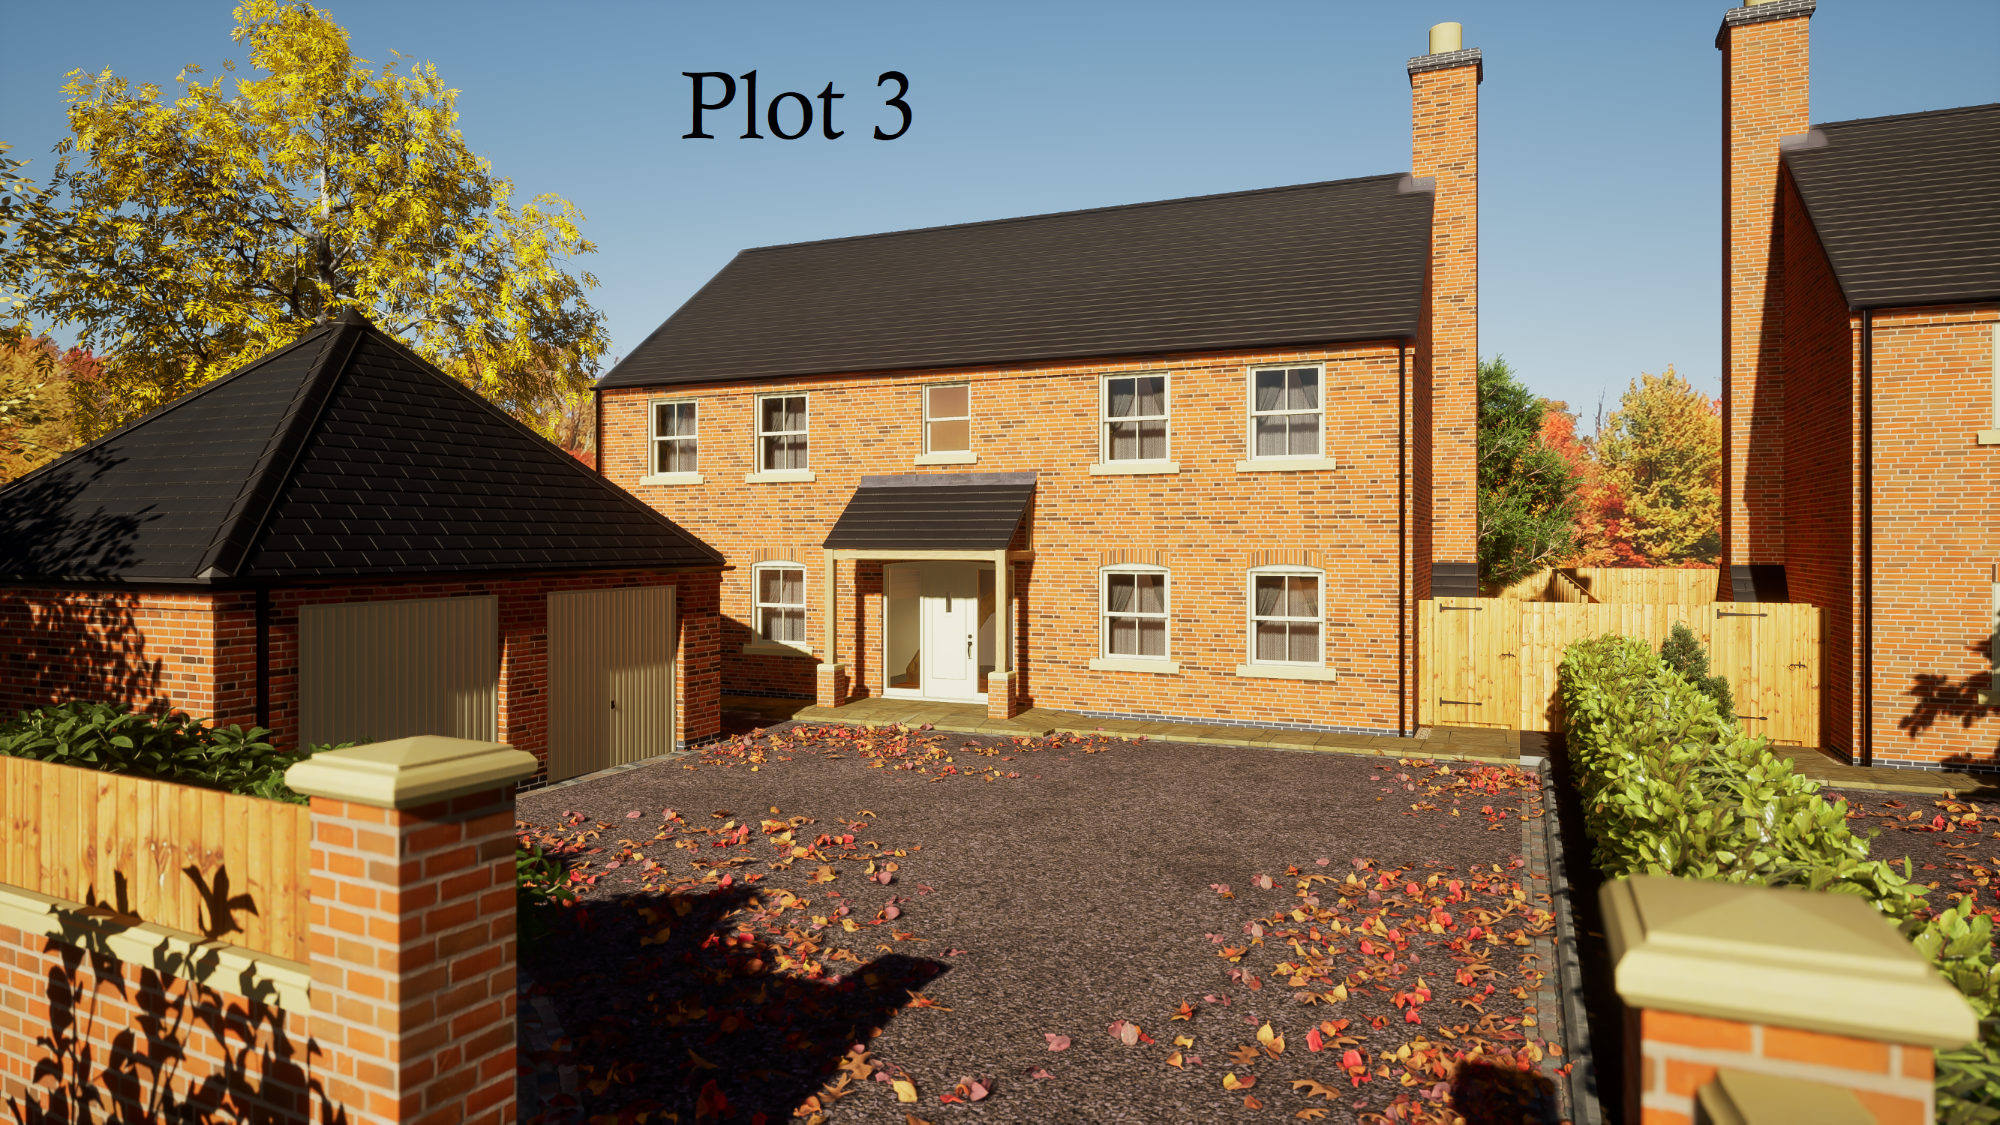 Plot 3 - Plots for sale in an exclusive development of 5 bespoke family homes, each with full planning permission for a 5 bed detached property